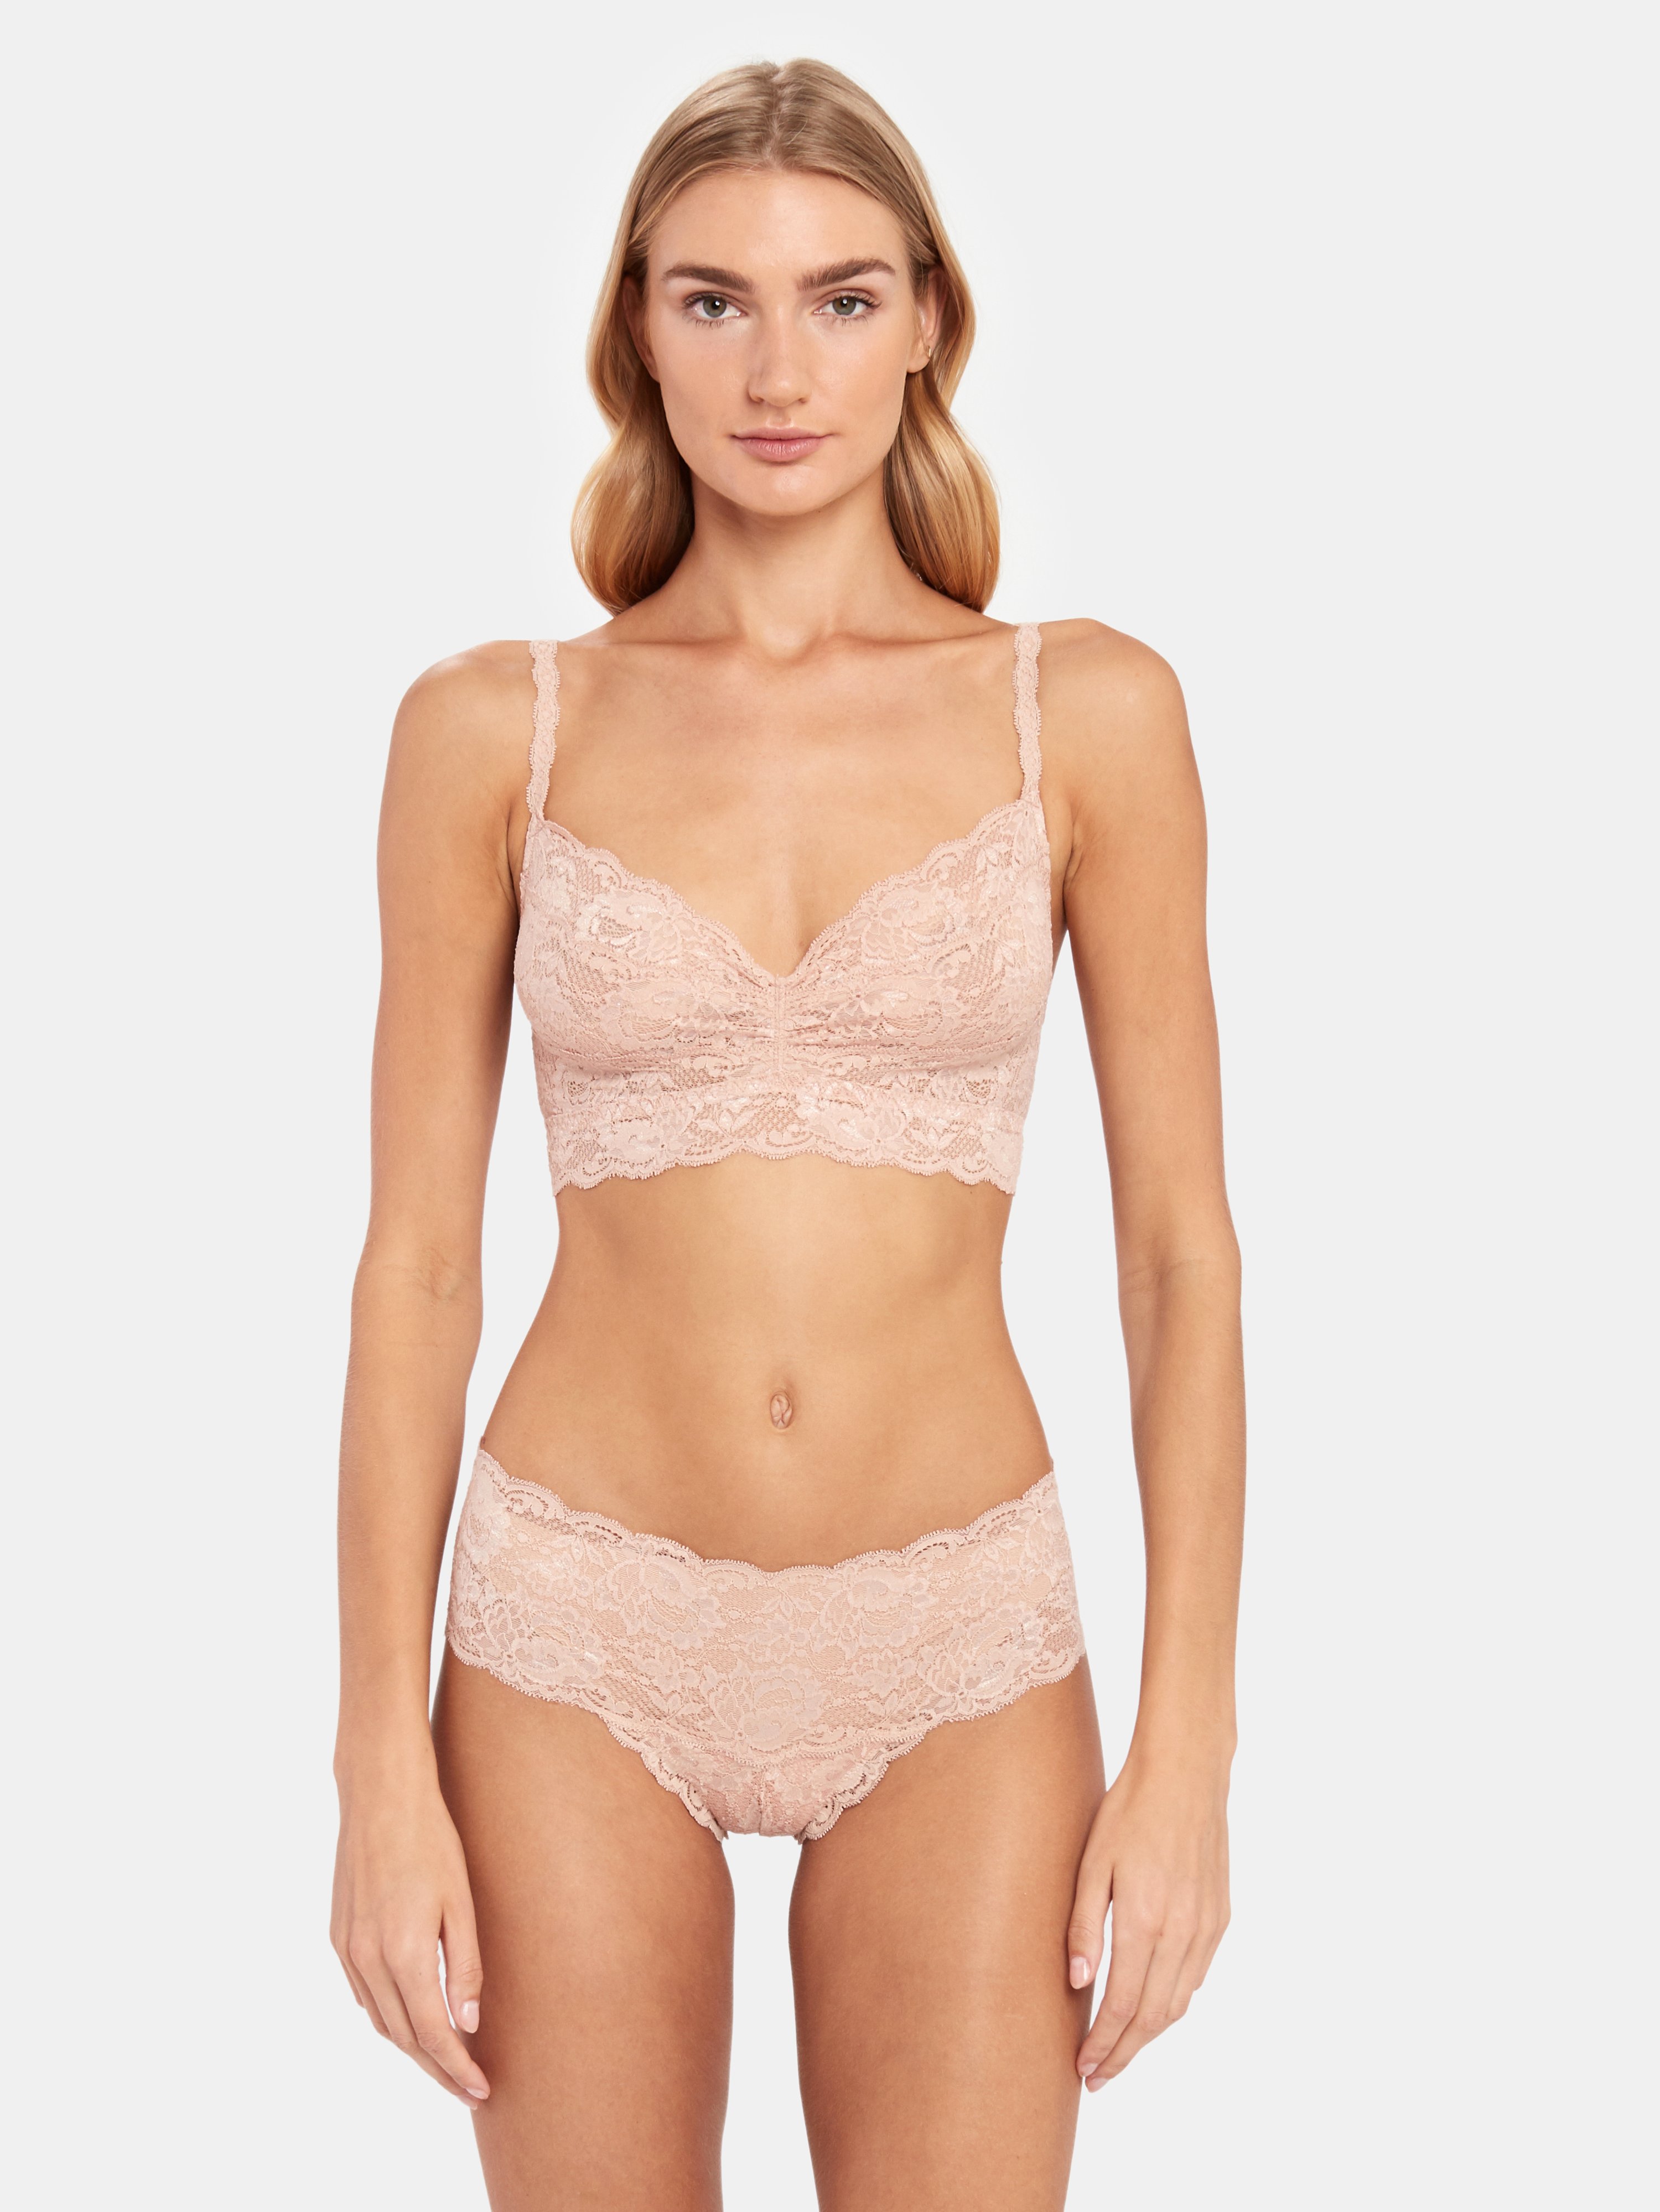 COSABELLA COSABELLA NEVER SAY NEVER SWEETIE SOFT LACE BRALETTE